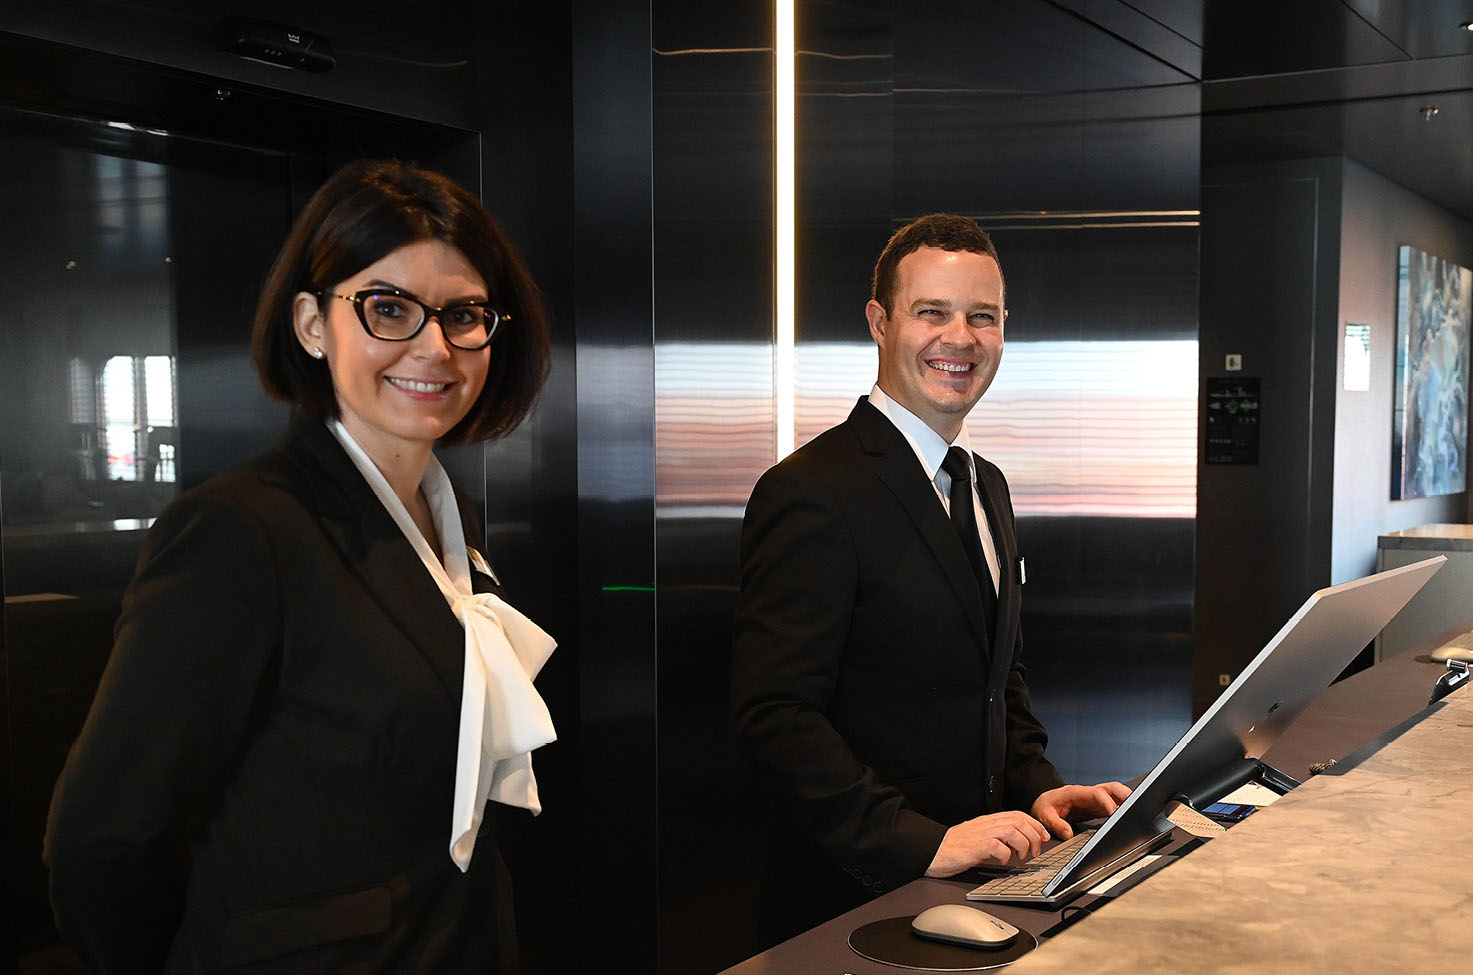 Two receptionists on board Scenic Eclipse